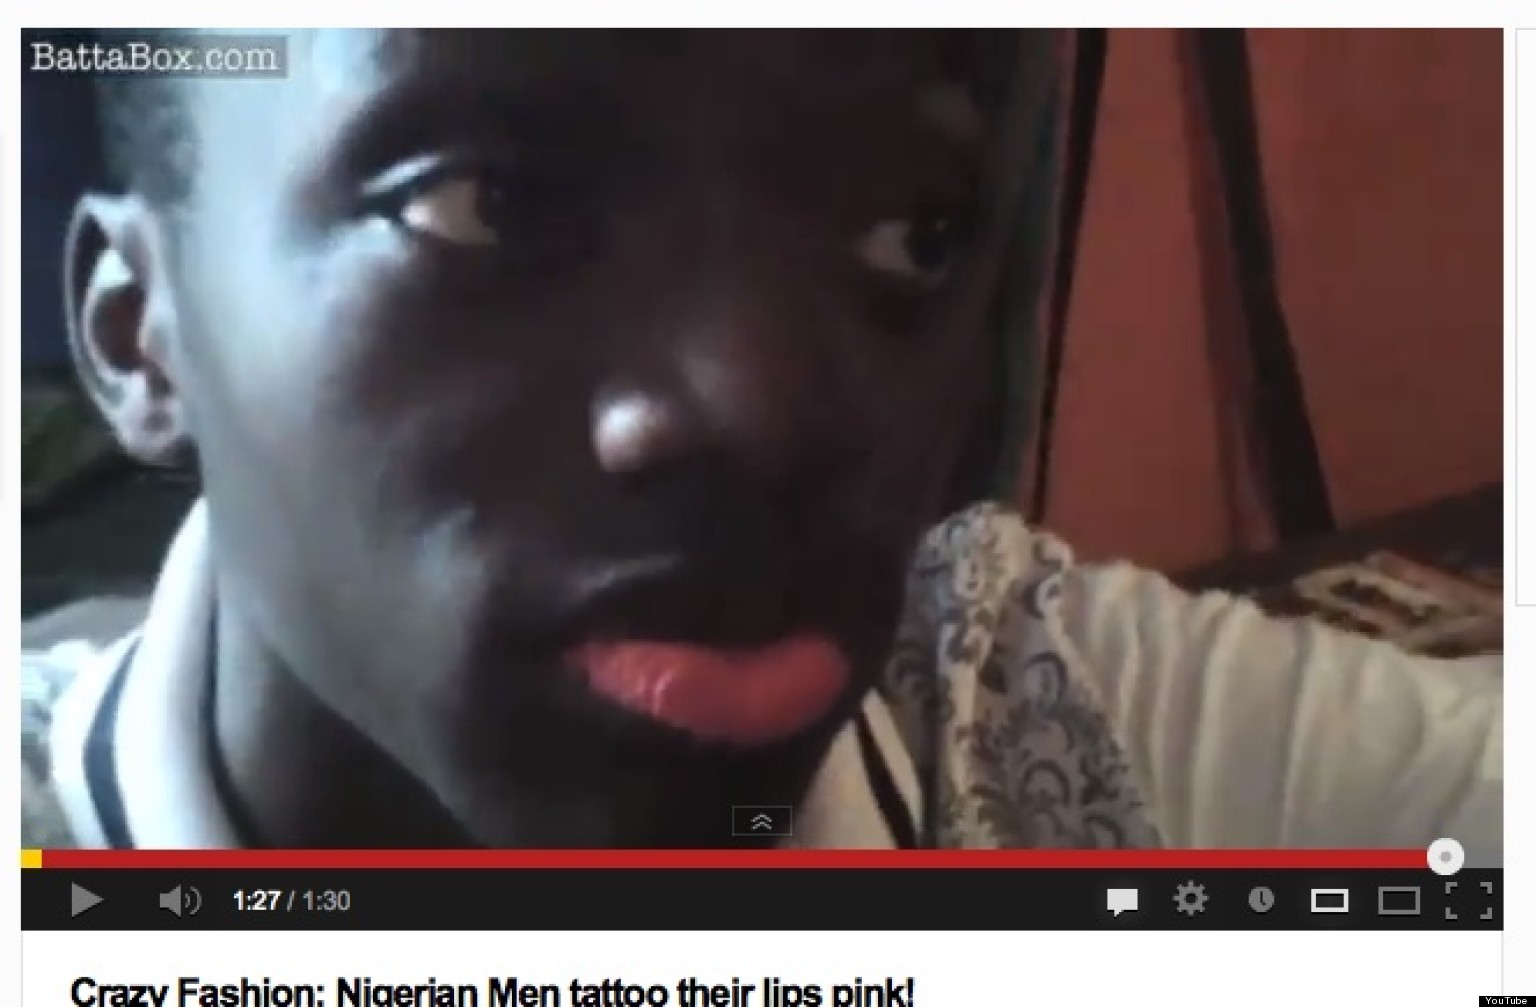 African Men Who Tattoo Their Lips Pink To Look More Attractive Video